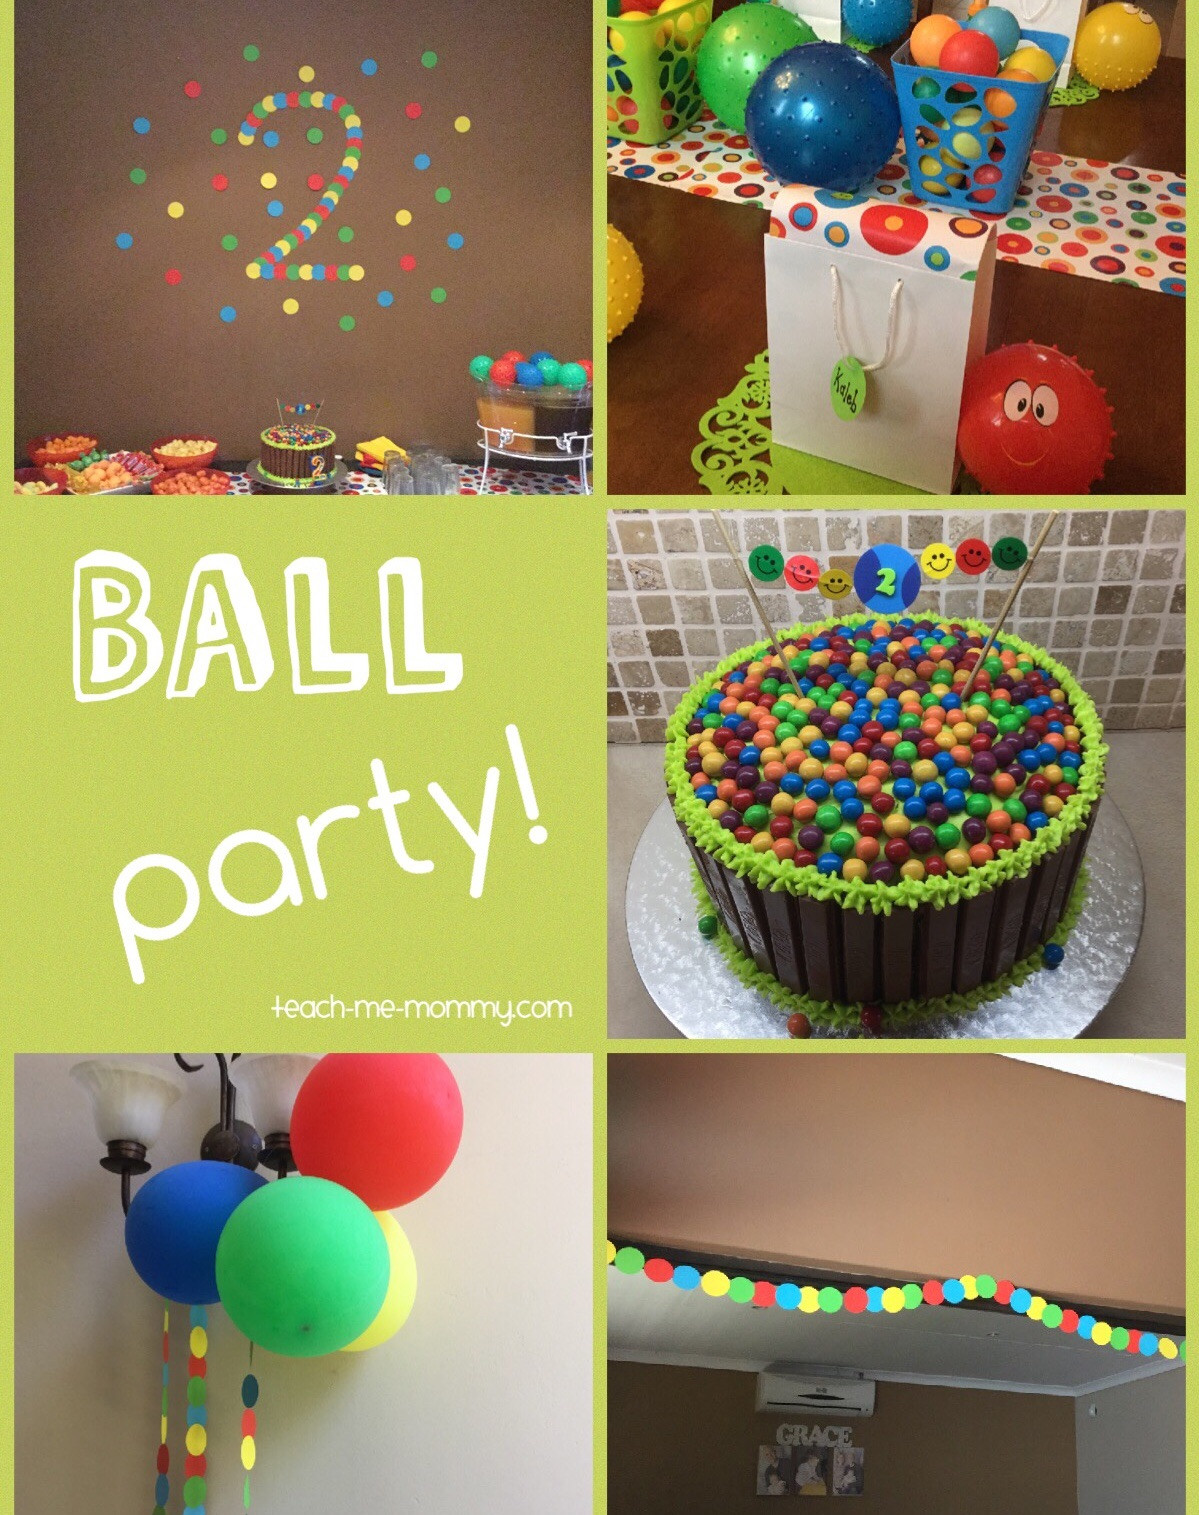 2 Year Old Boy Birthday Party Ideas
 Ball Themed Party for a 2 Year Old Teach Me Mommy